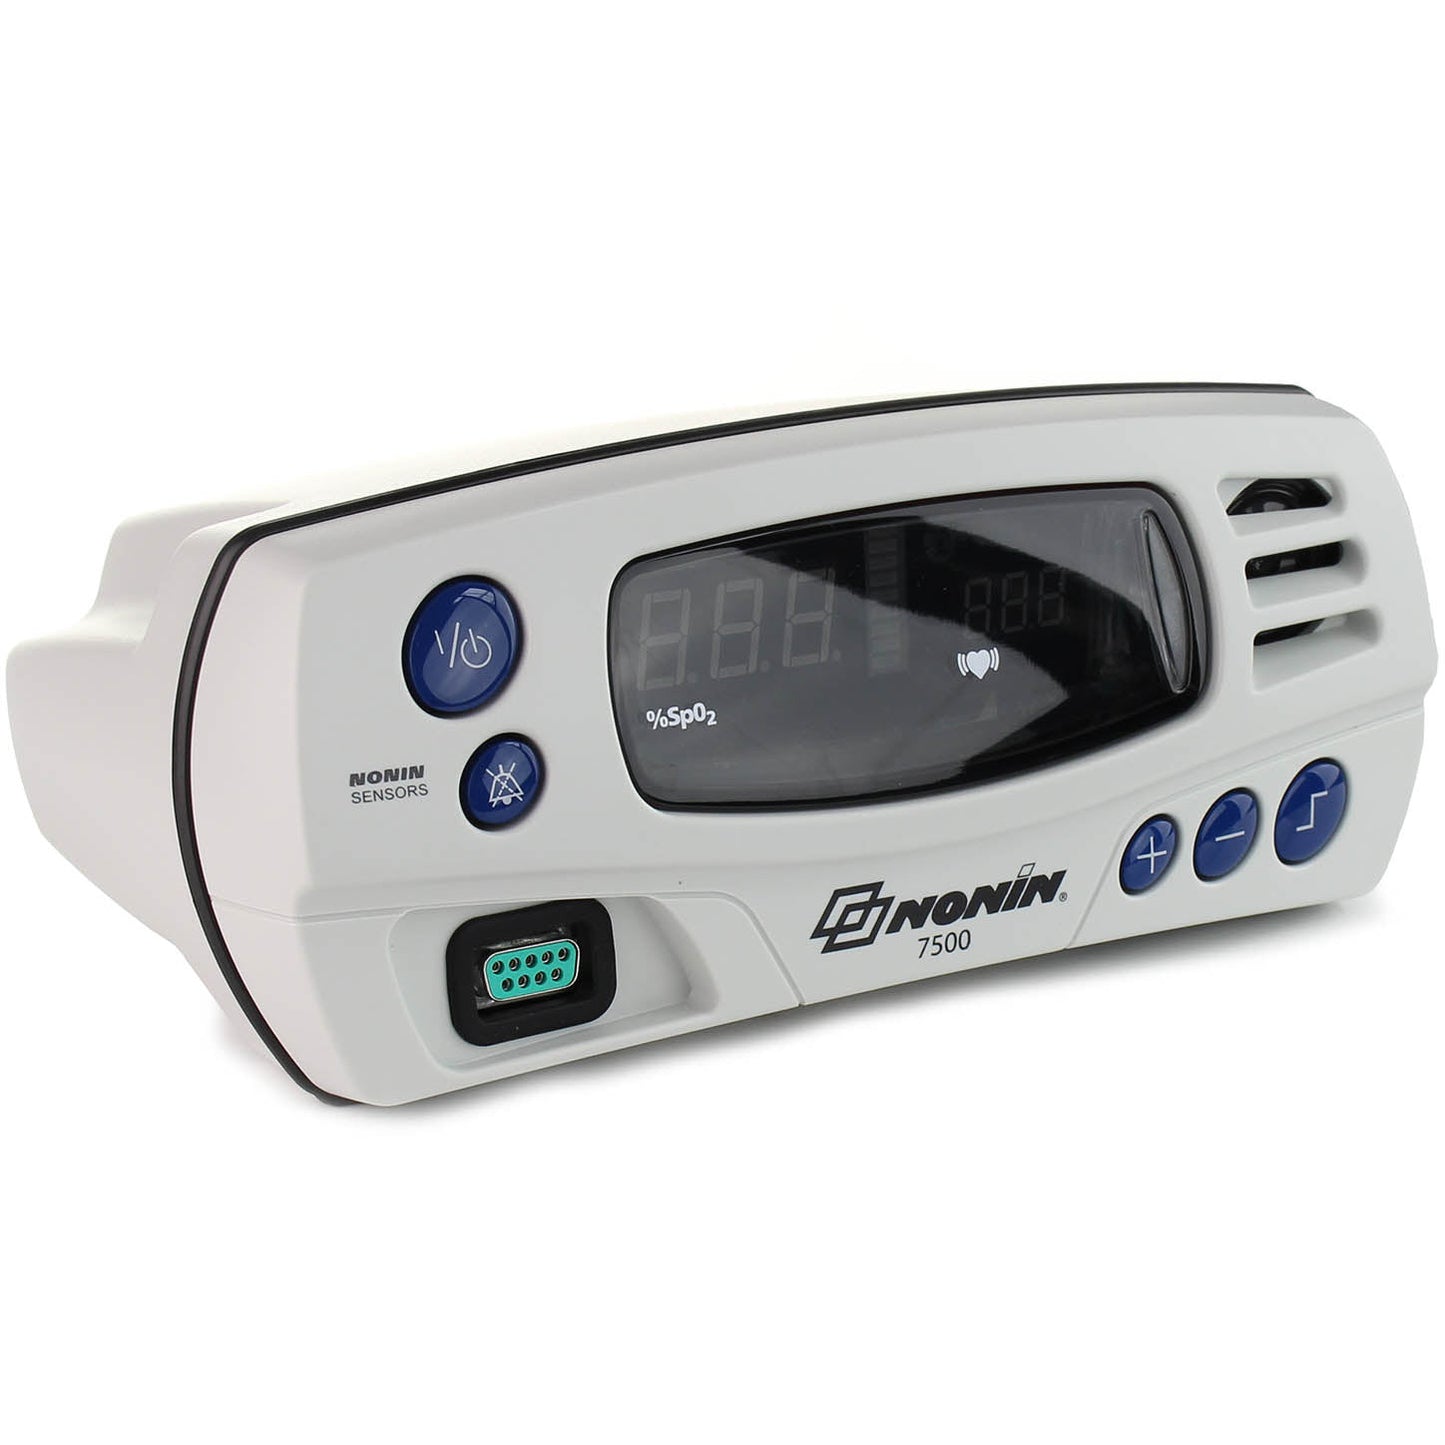 Nonin 7500 Table Top Pulse Oximeter with Prostand 2